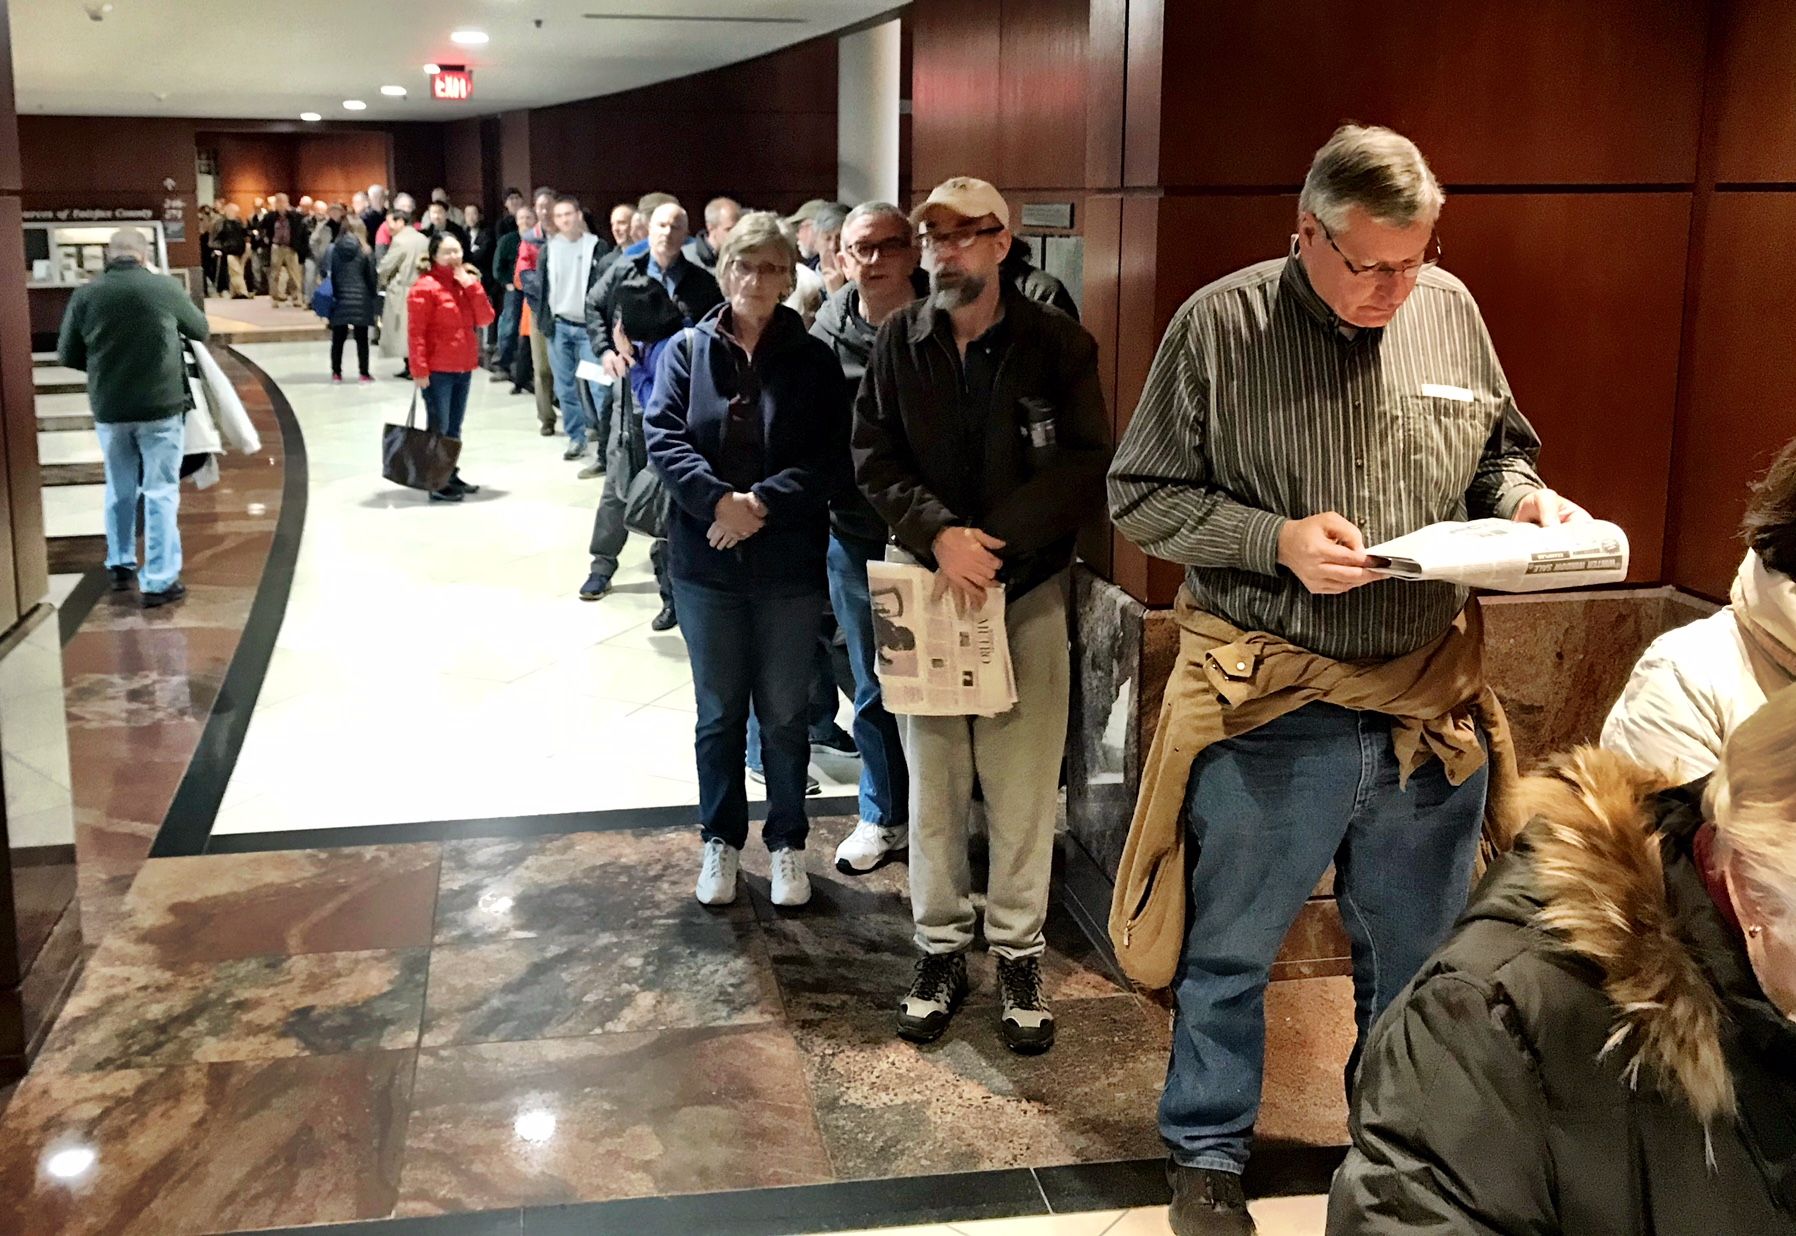 Fairfax County taxpayers stand in line to prepay property taxes, ahead of the new 2018 tax laws. (WTOP/Neal Augenstein)